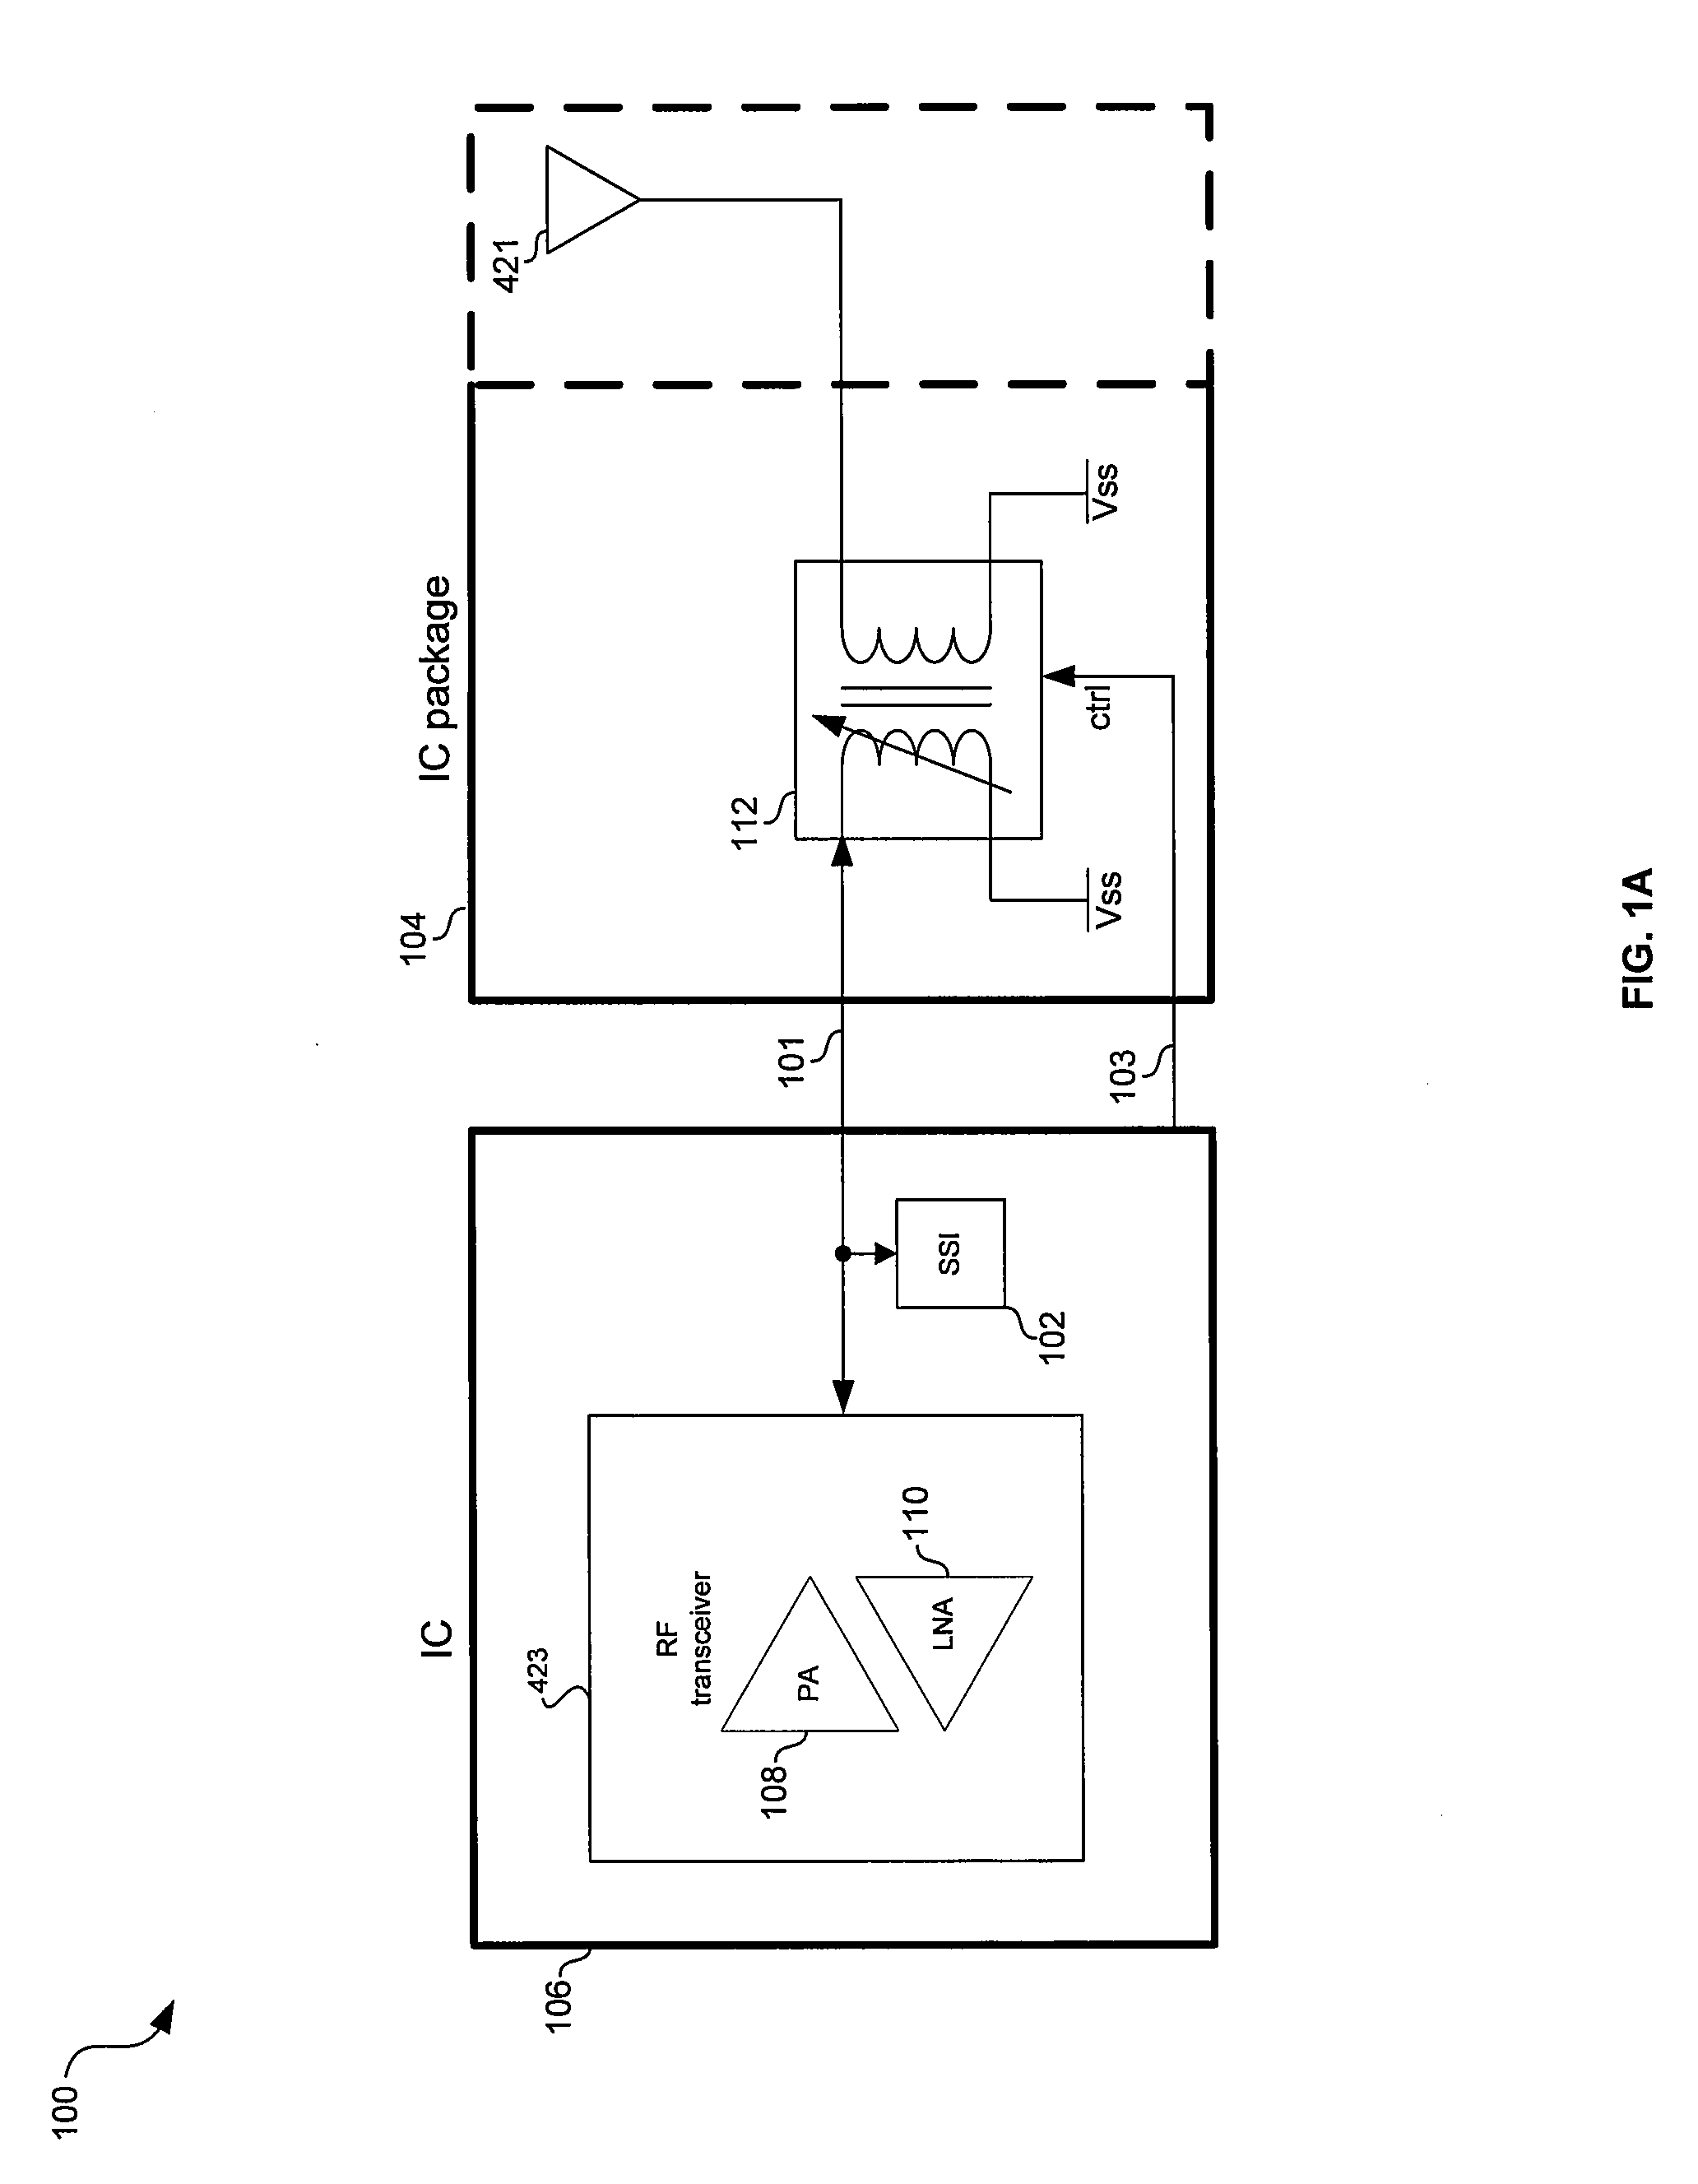 Method and system for configuring a transformer embedded in a multi-layer integrated circuit (IC) package